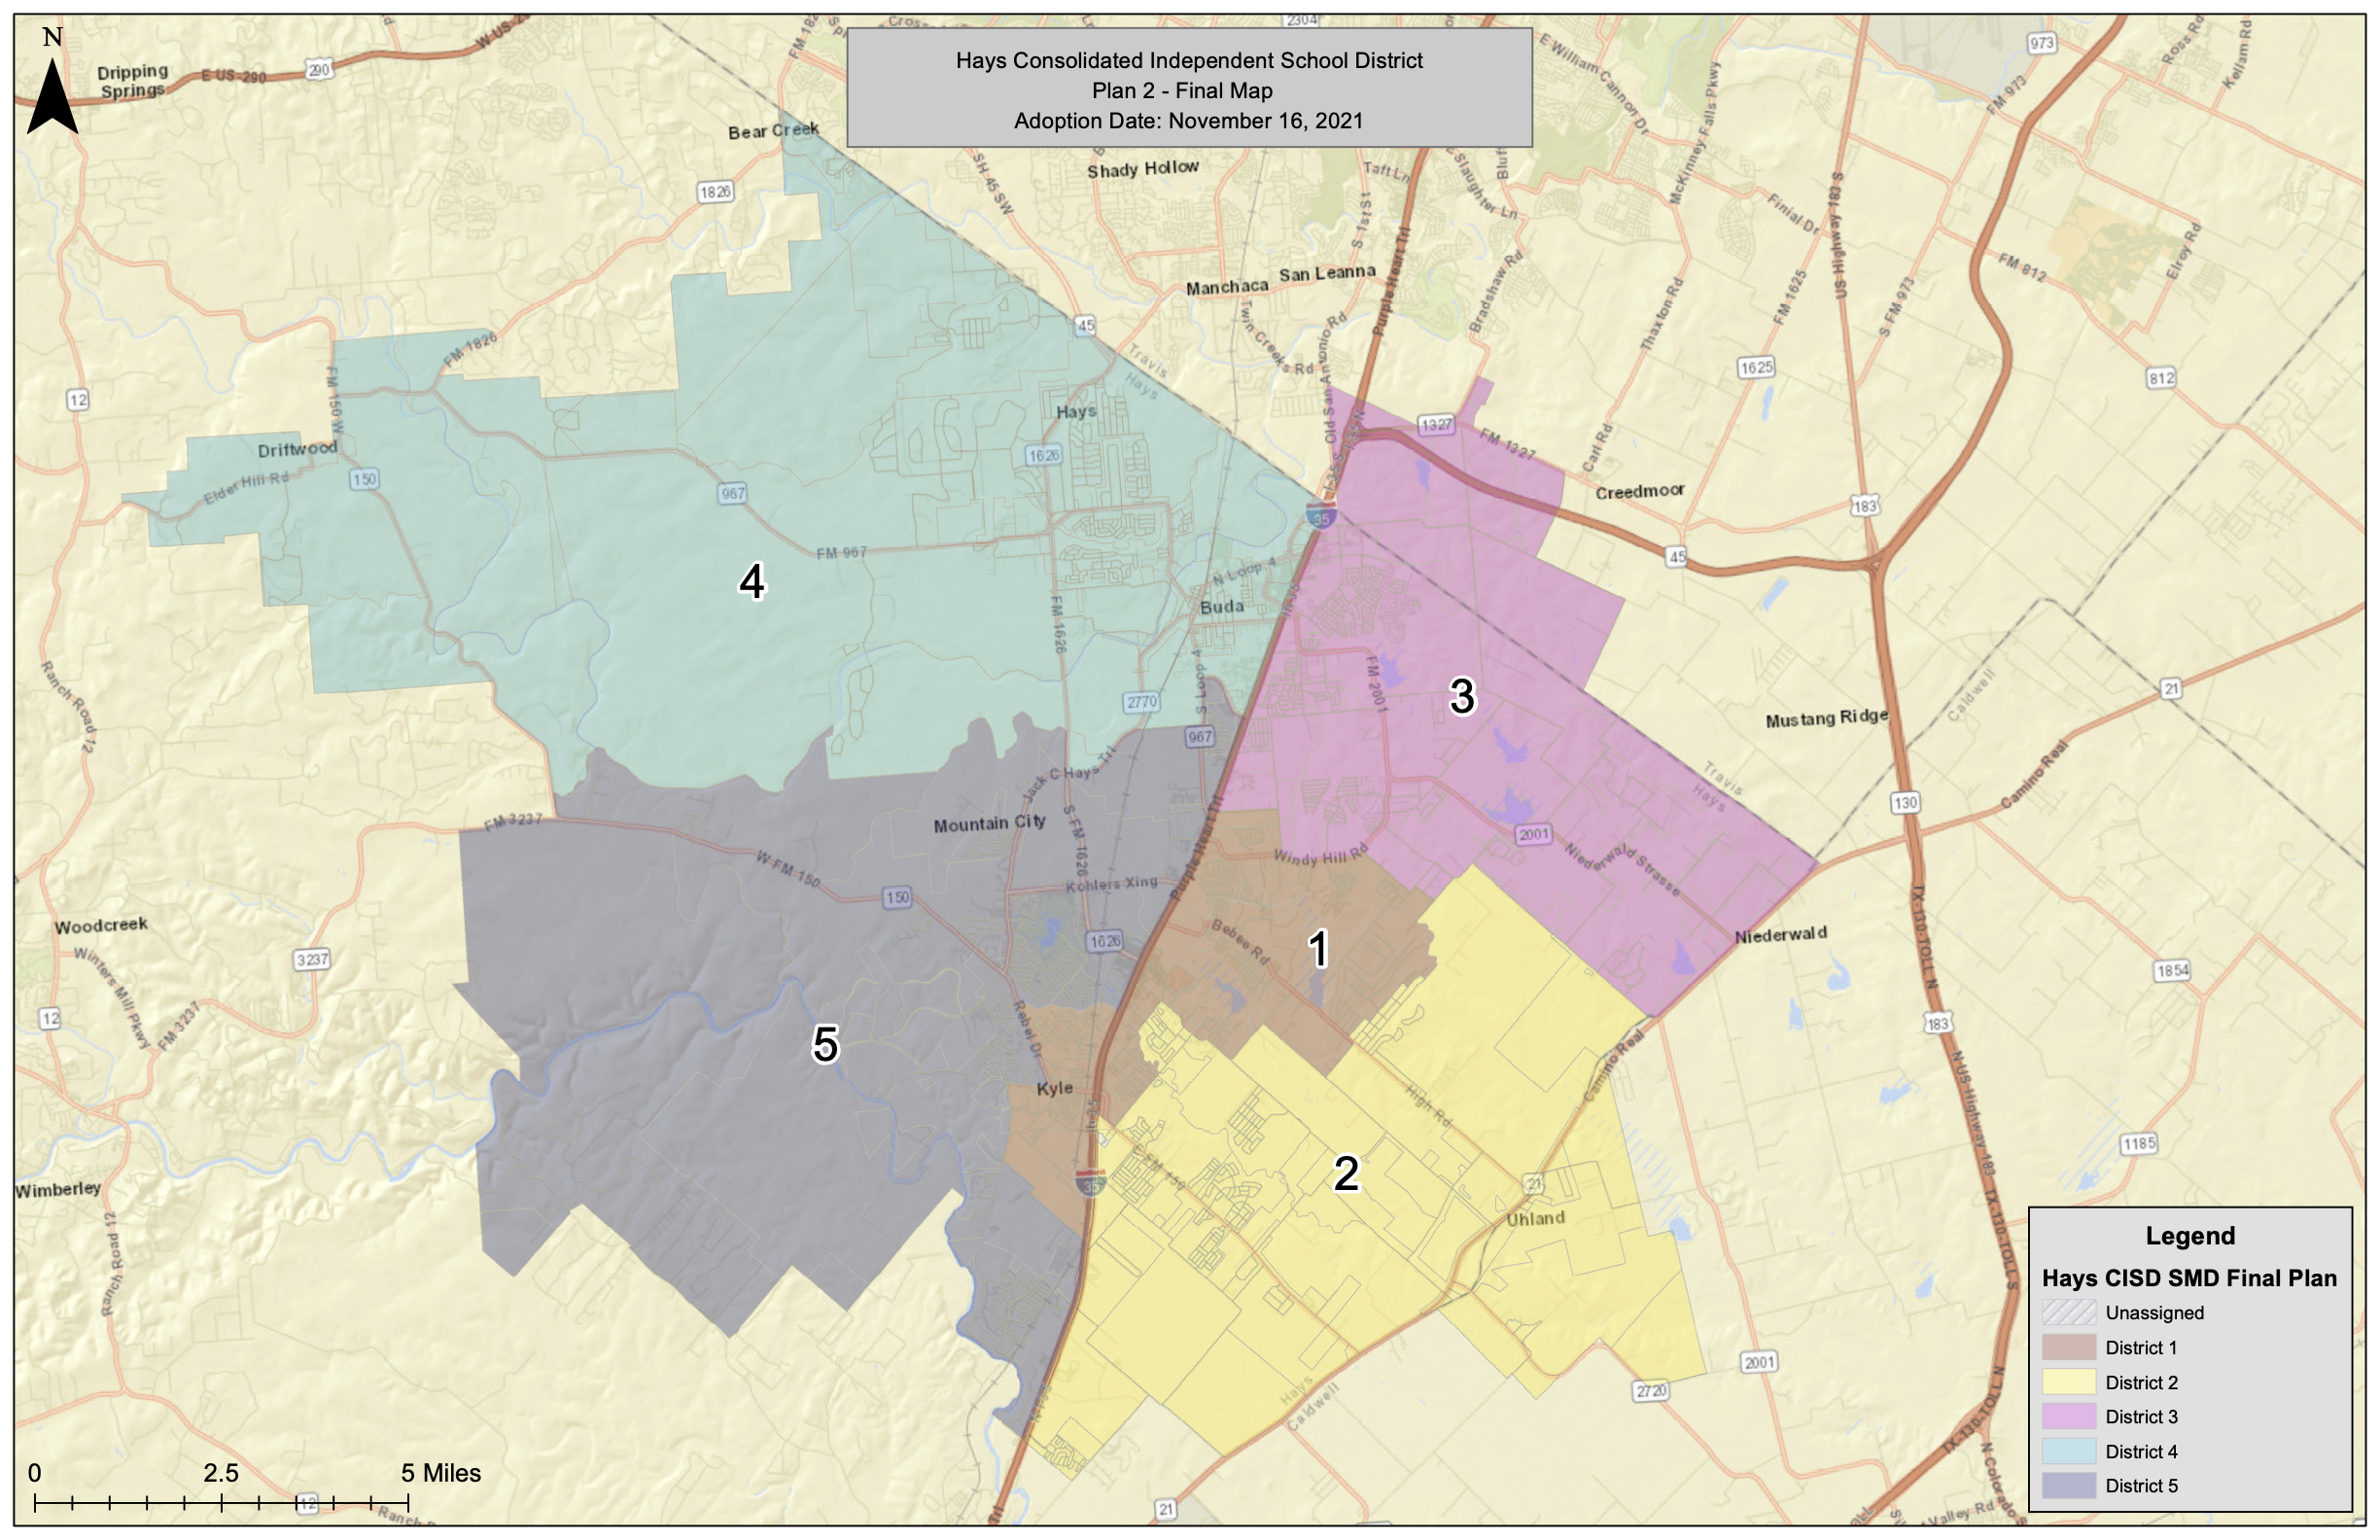 District Map for Hays CISD